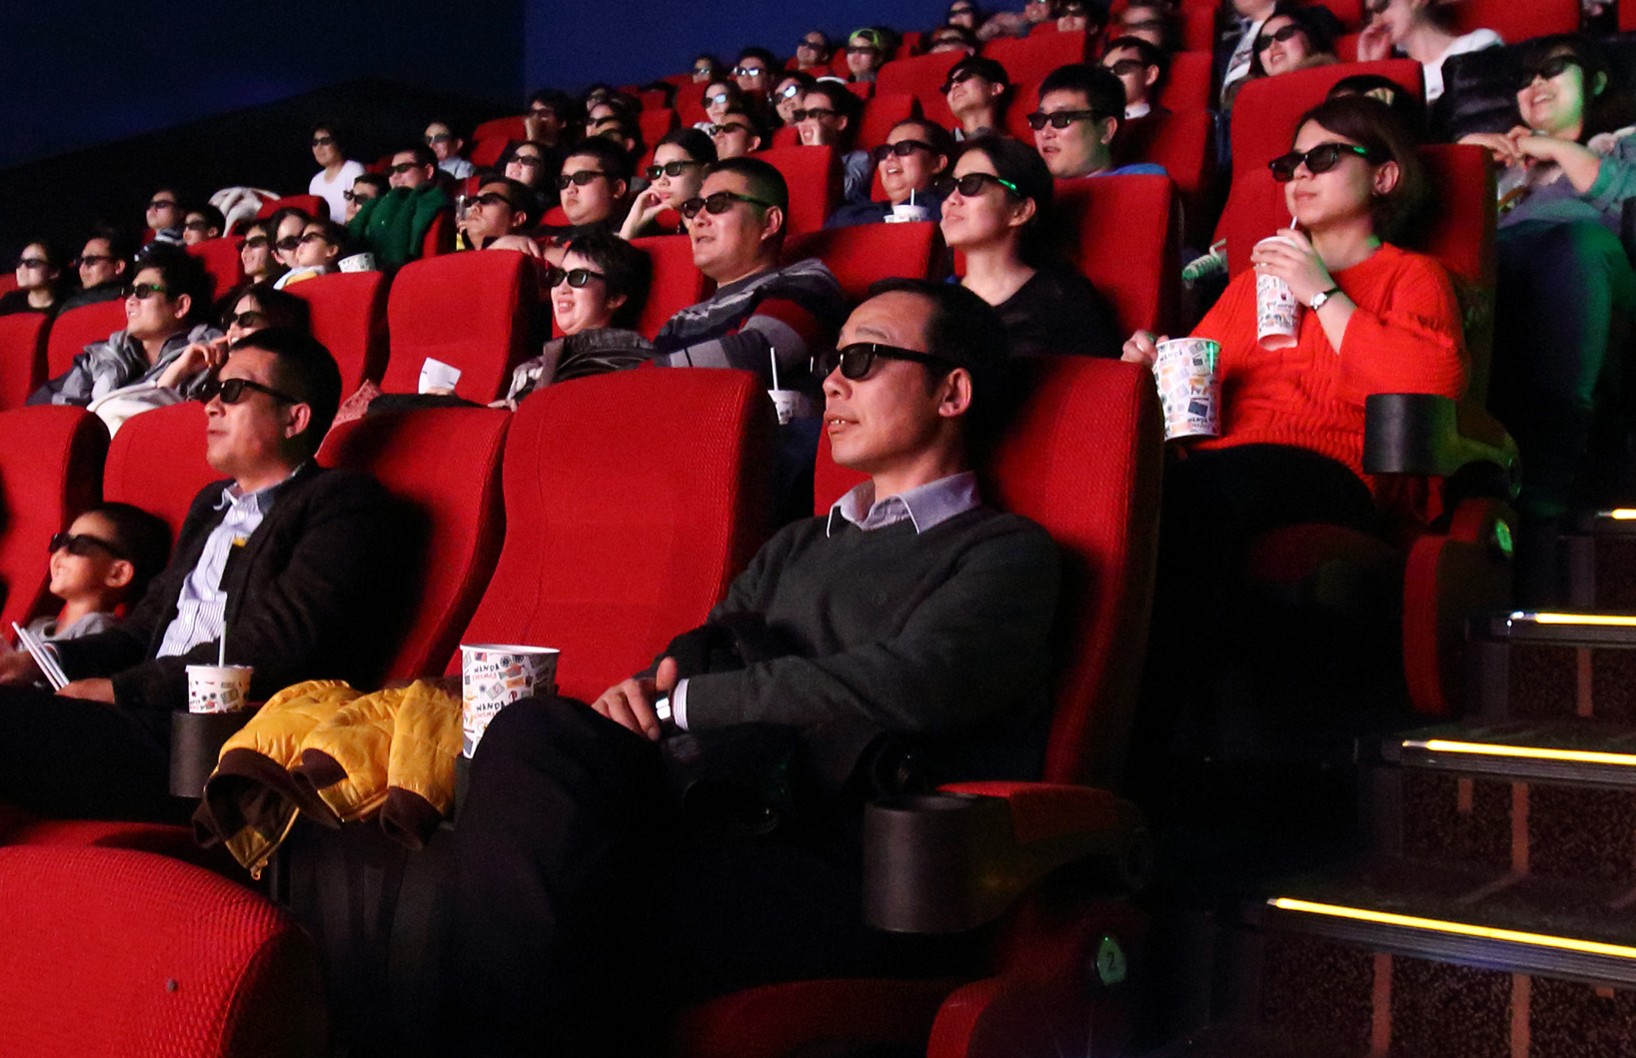 Movie goers with 3-D glasses in a cinema at the Tongzhou Wanda Plaza shopping mall, operated by Dalian Wanda Group, in Beijing on Saturday, March 14, 2015. Photo: Bloomberg